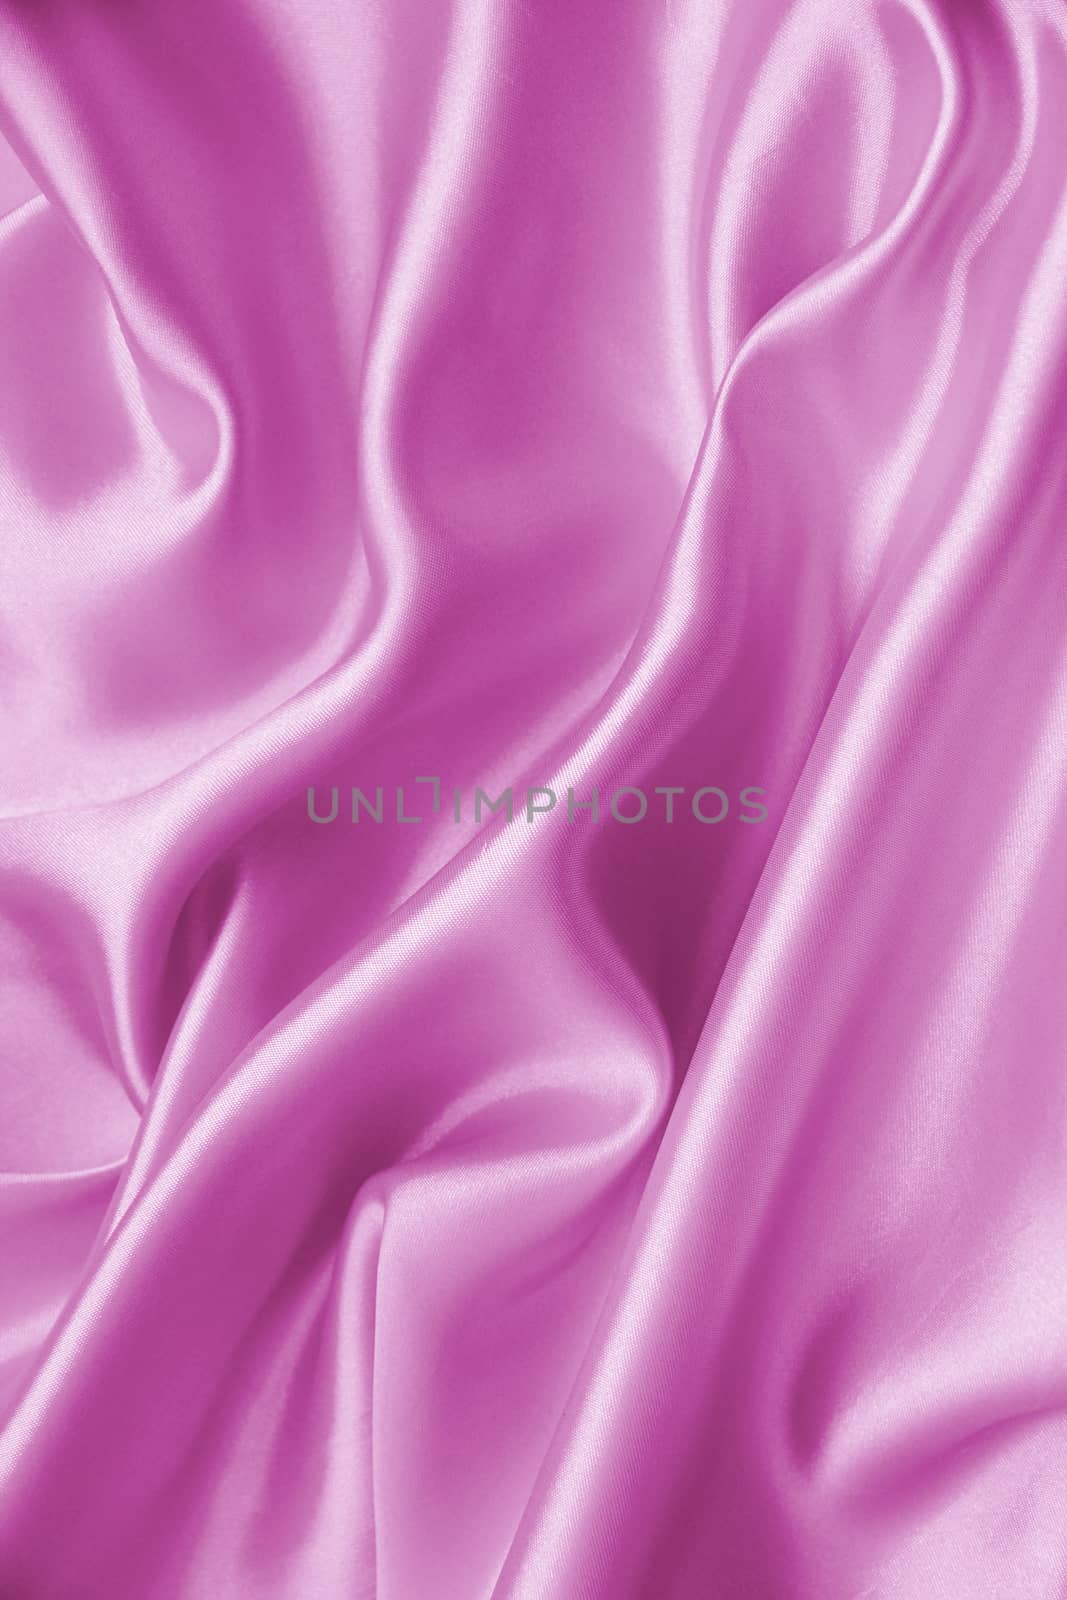 Smooth elegant lilac silk or satin texture as background  by oxanatravel